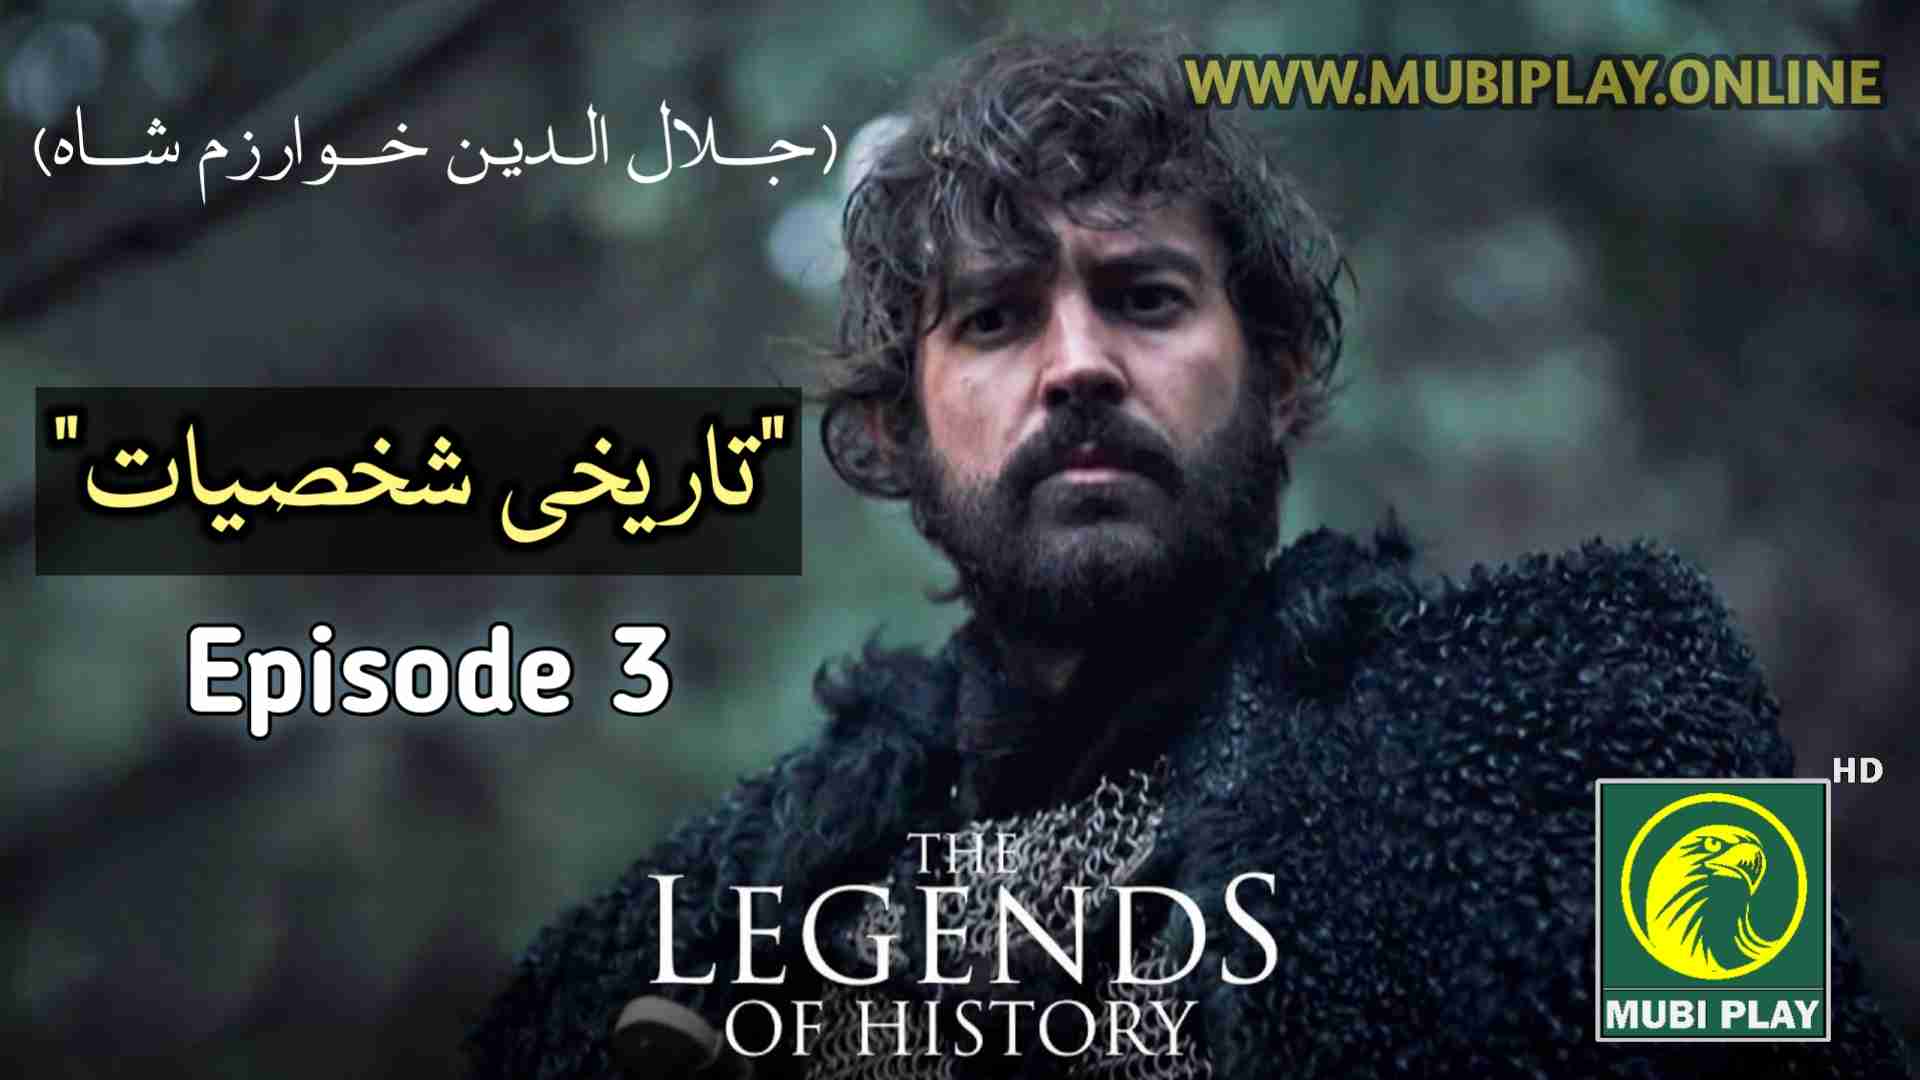 Legends of History Episode 3 with Urdu Subtitles by MubiPlay